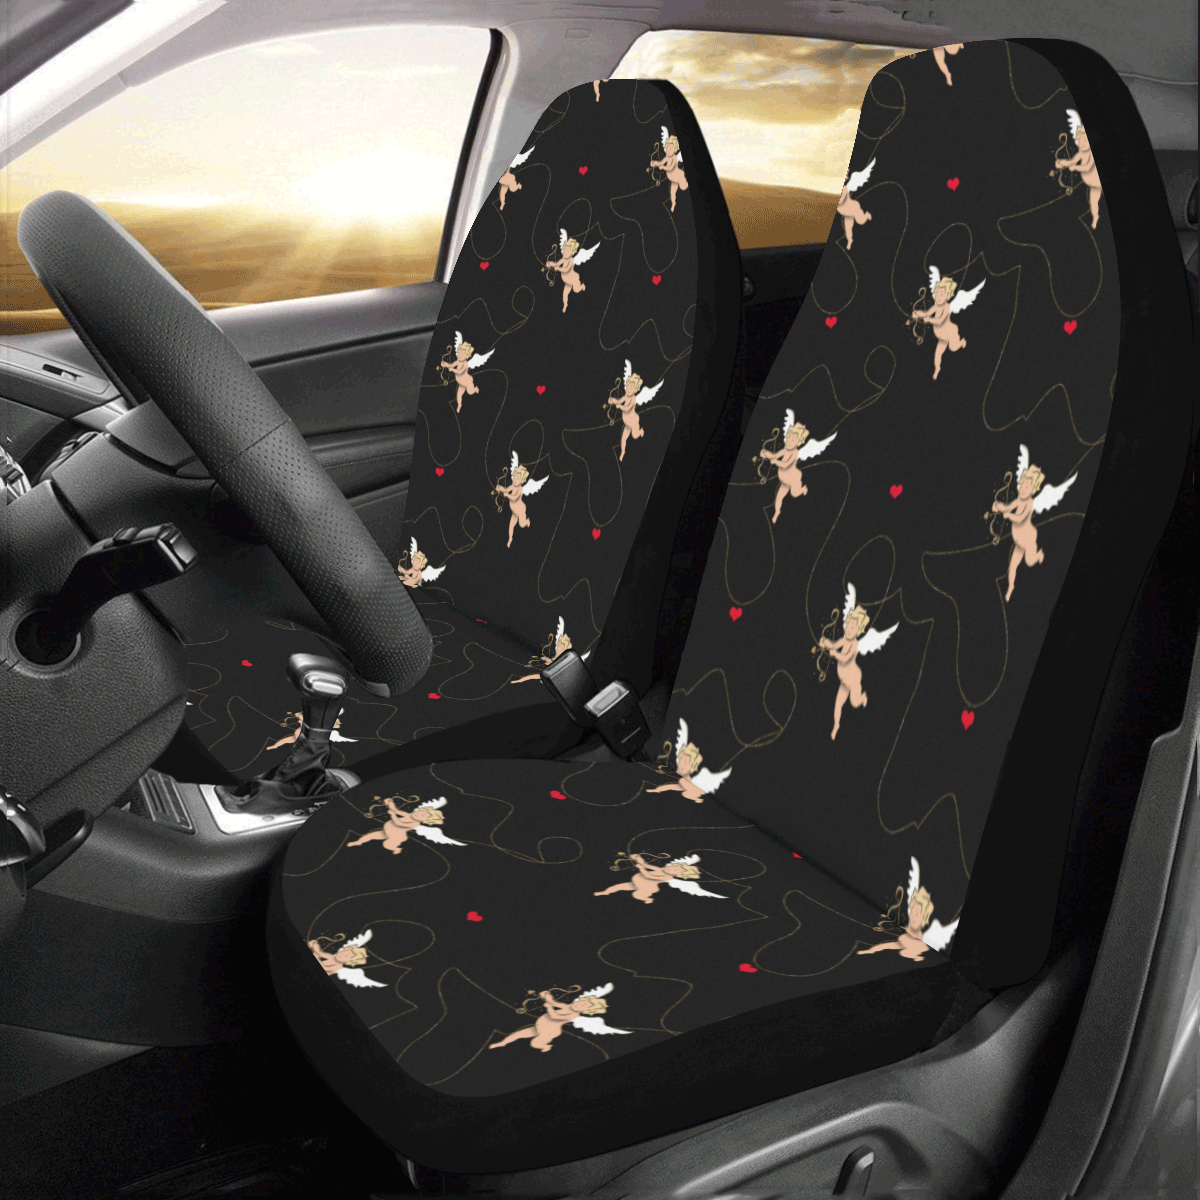 Valentines angels - dense Car Seat Covers (Set of 2)